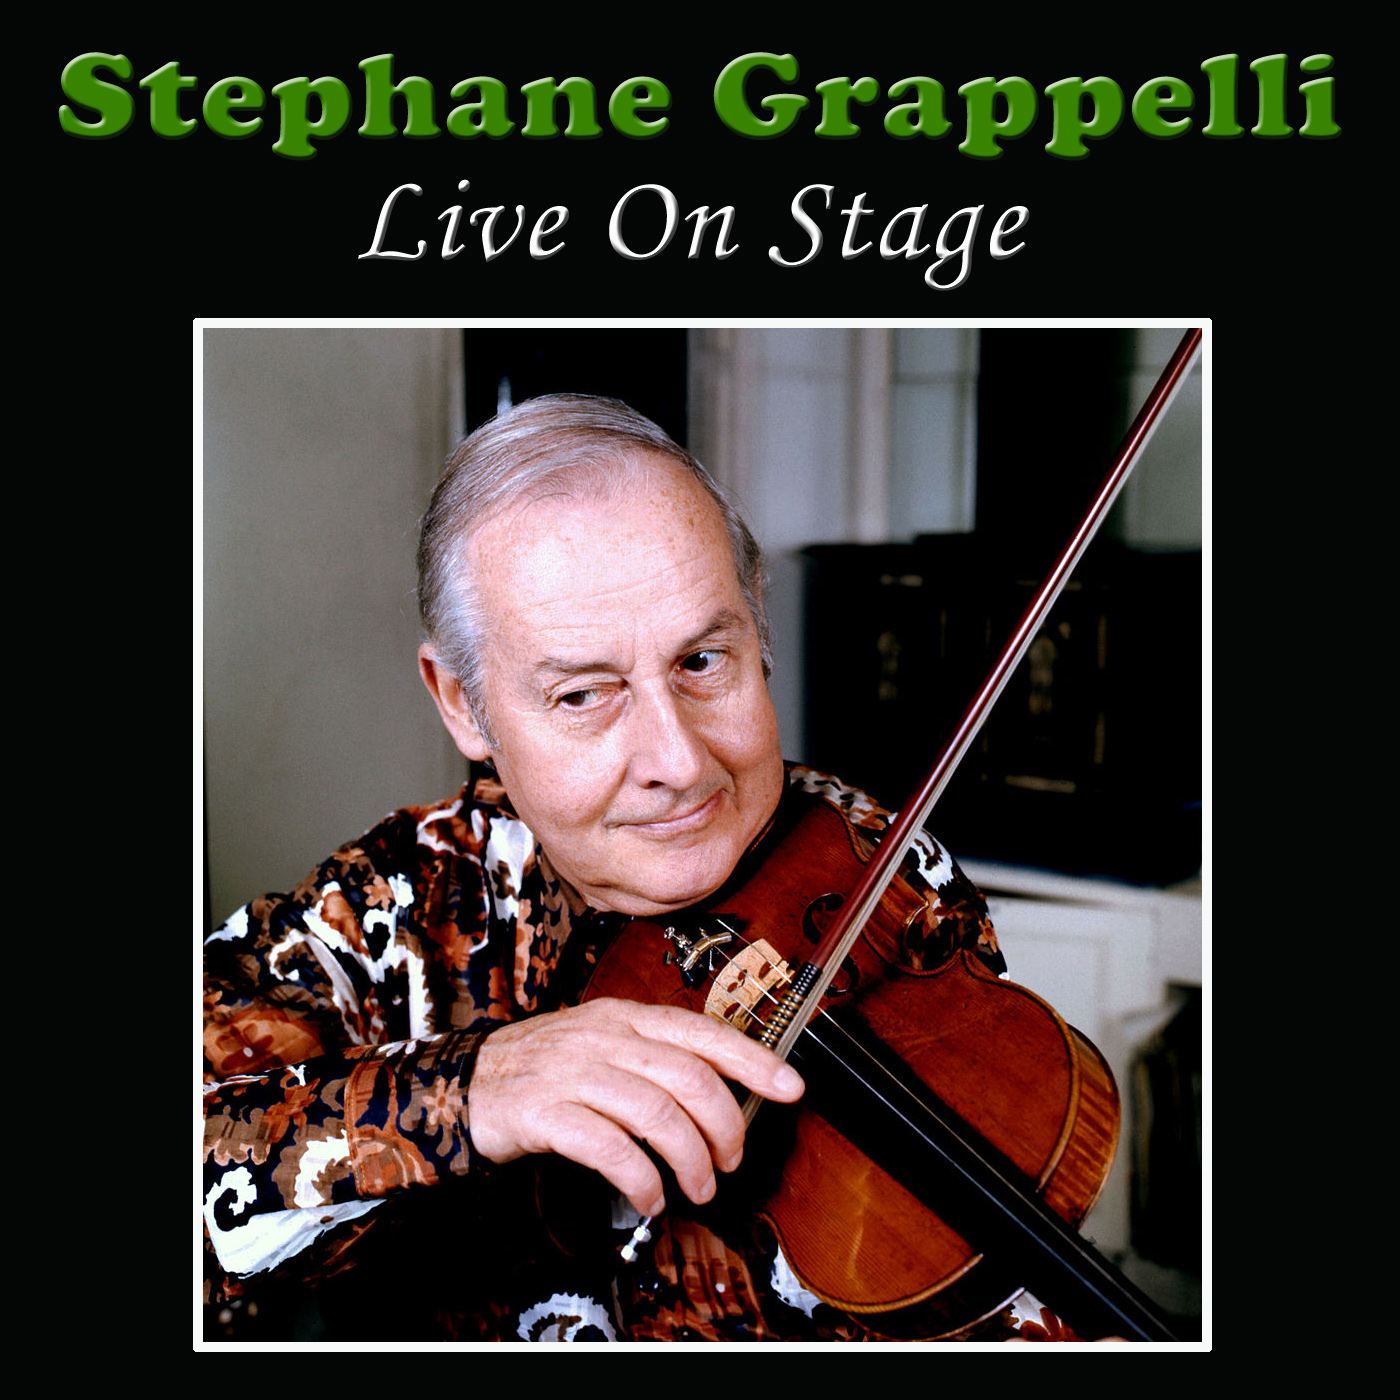 Stephane Grappelli Live On Stage (Live)